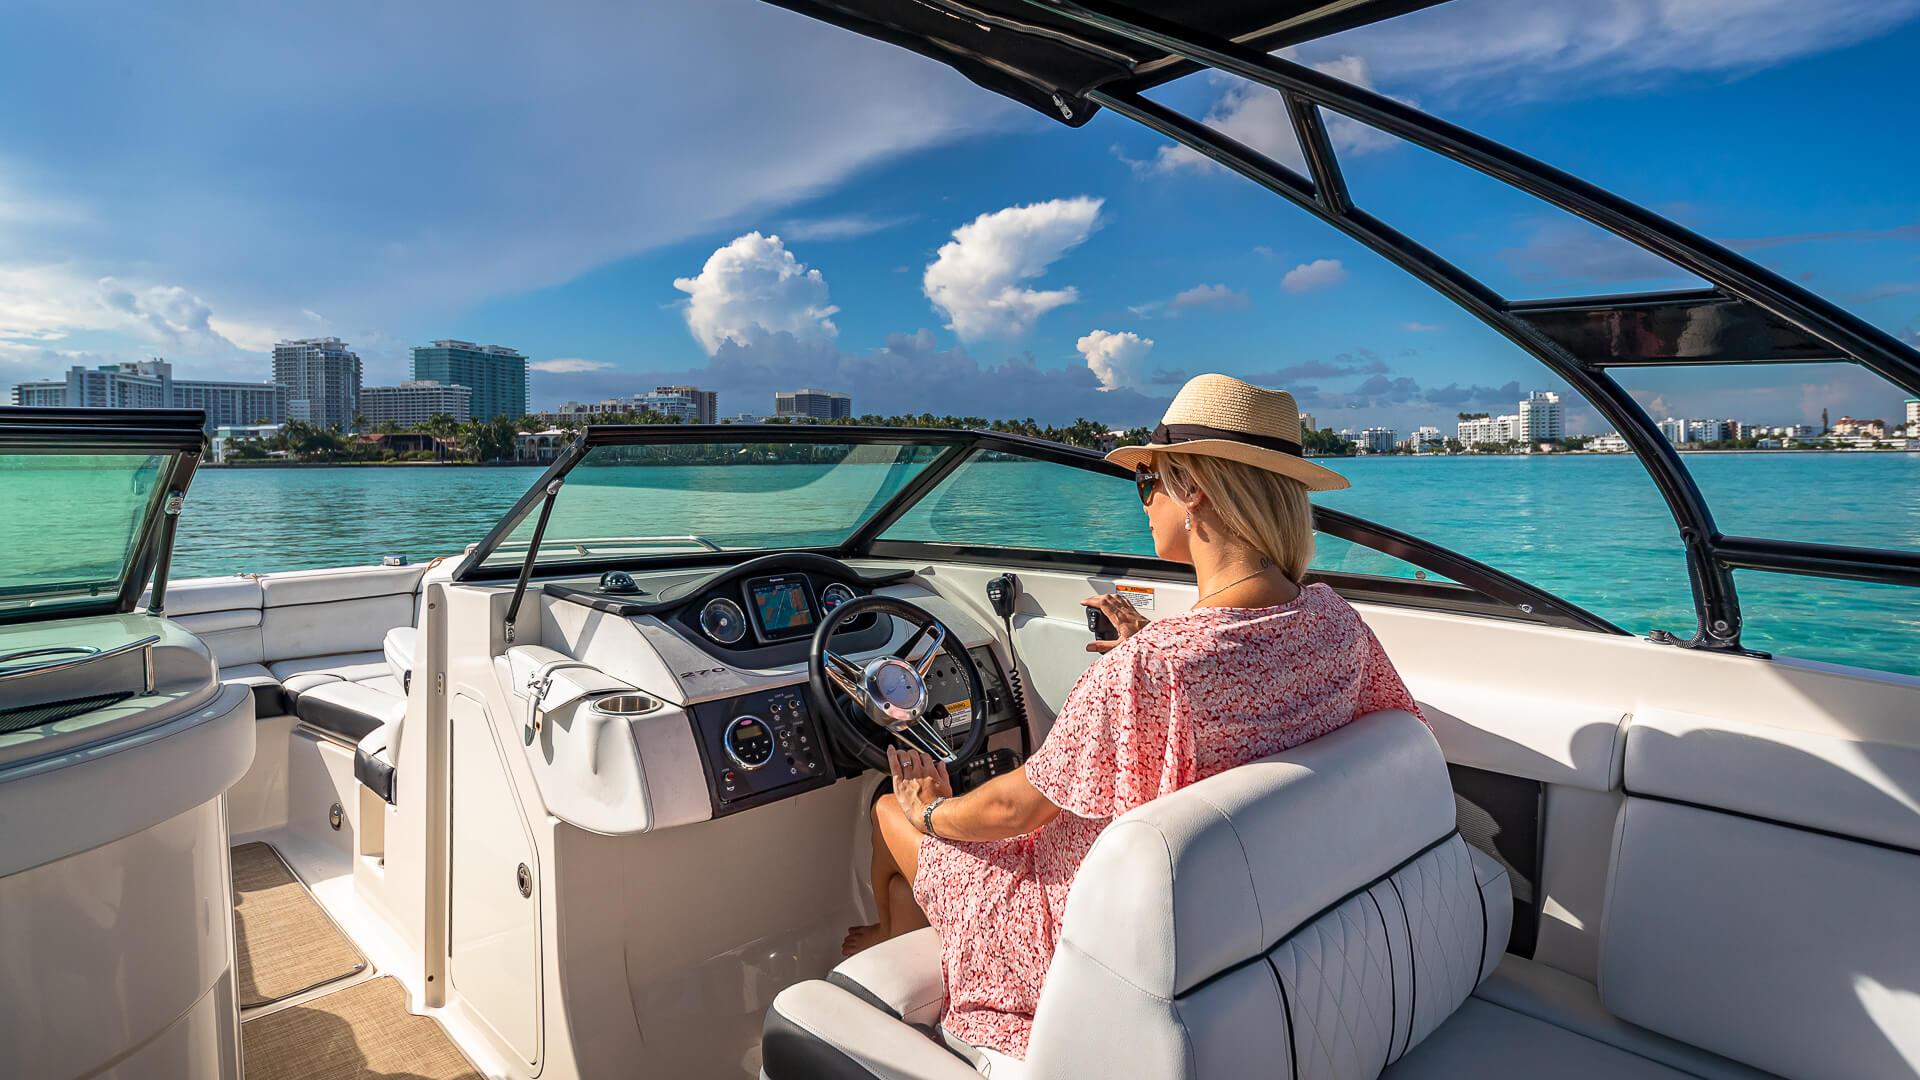 Boating Lesson Miami - Learn How To Drive A Boat In Miami